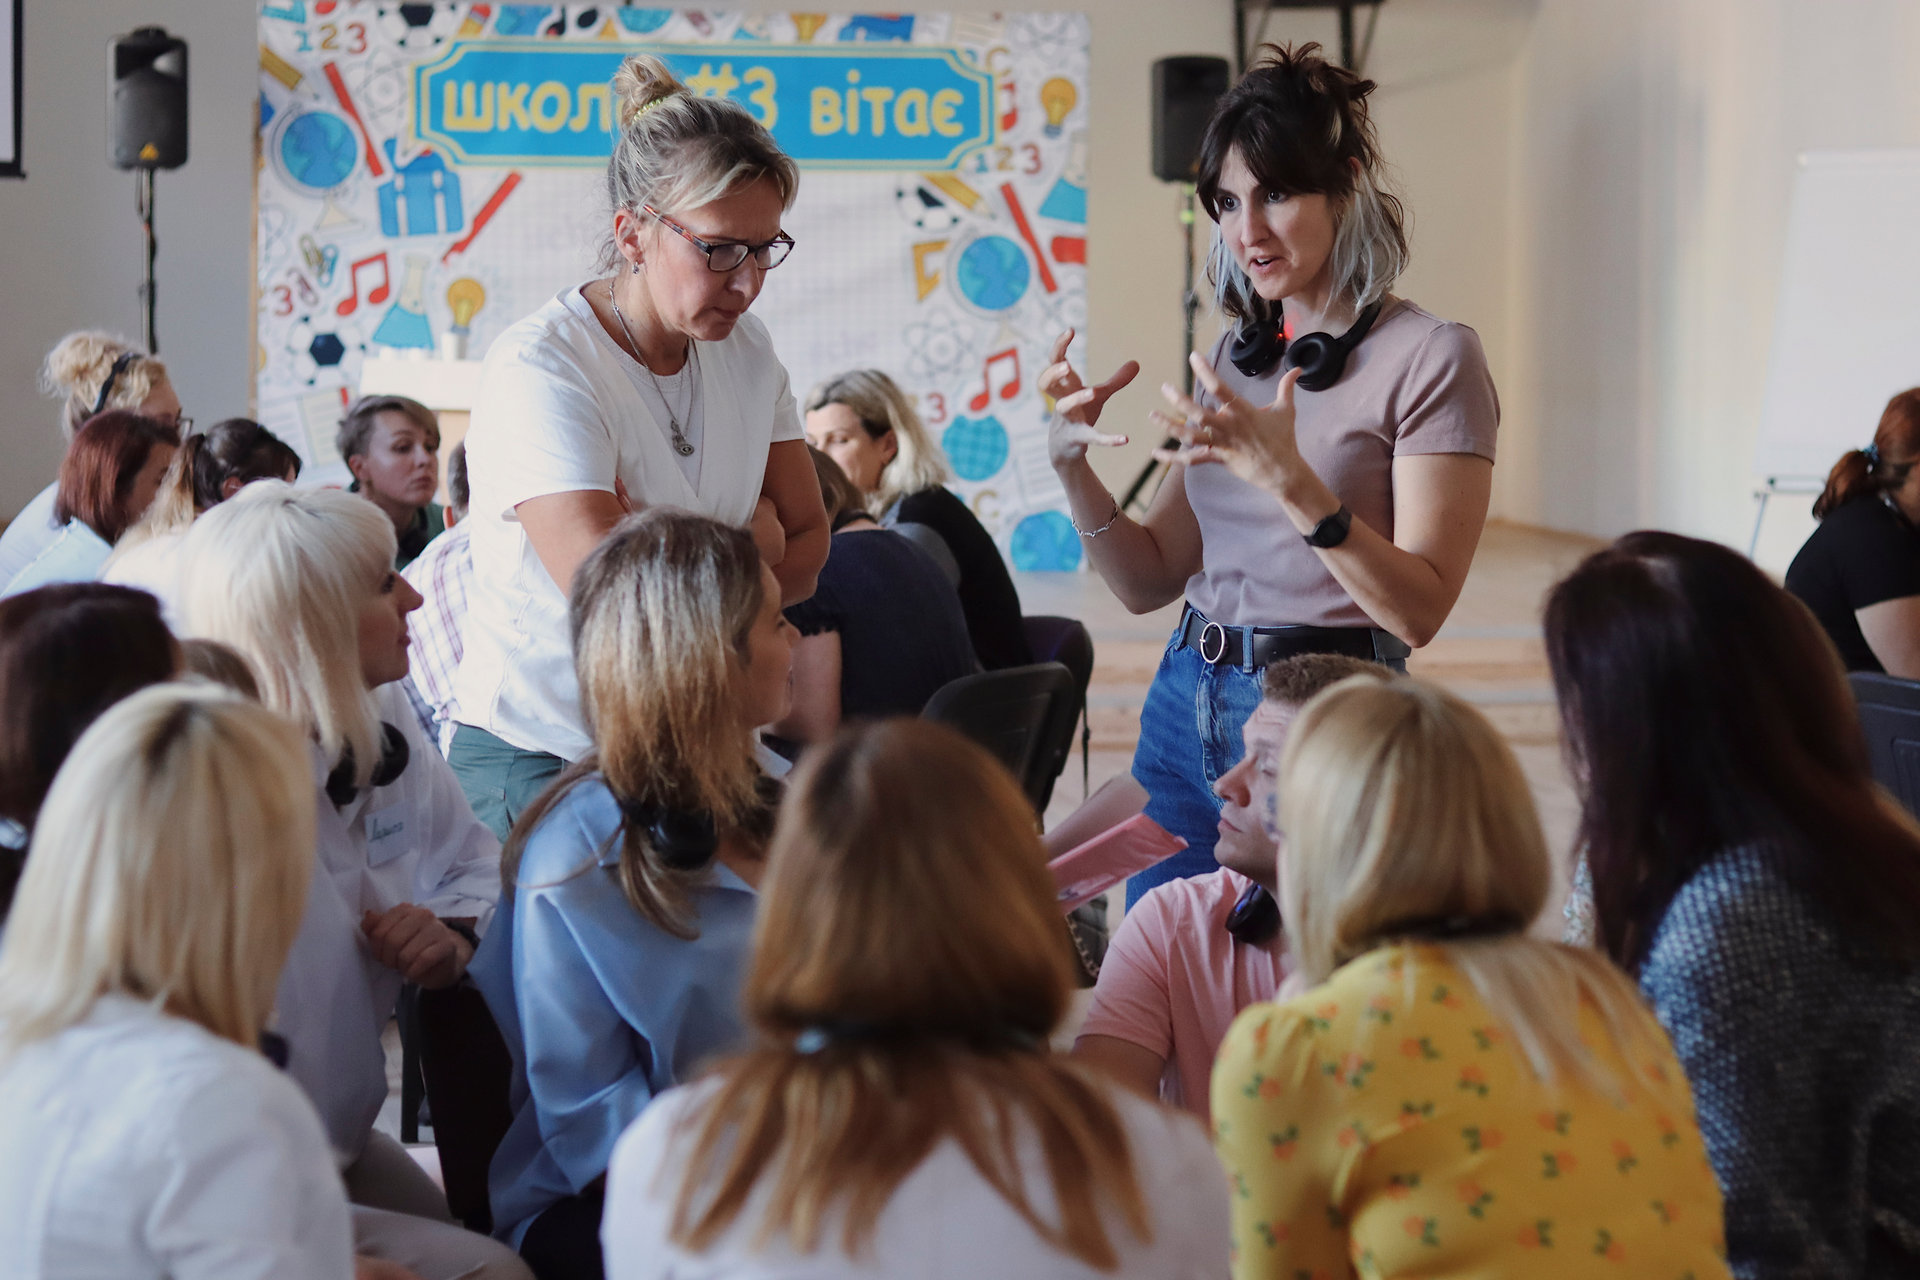 71 Ukrainian teachers and psychologists honed their skills on how to deal with trauma